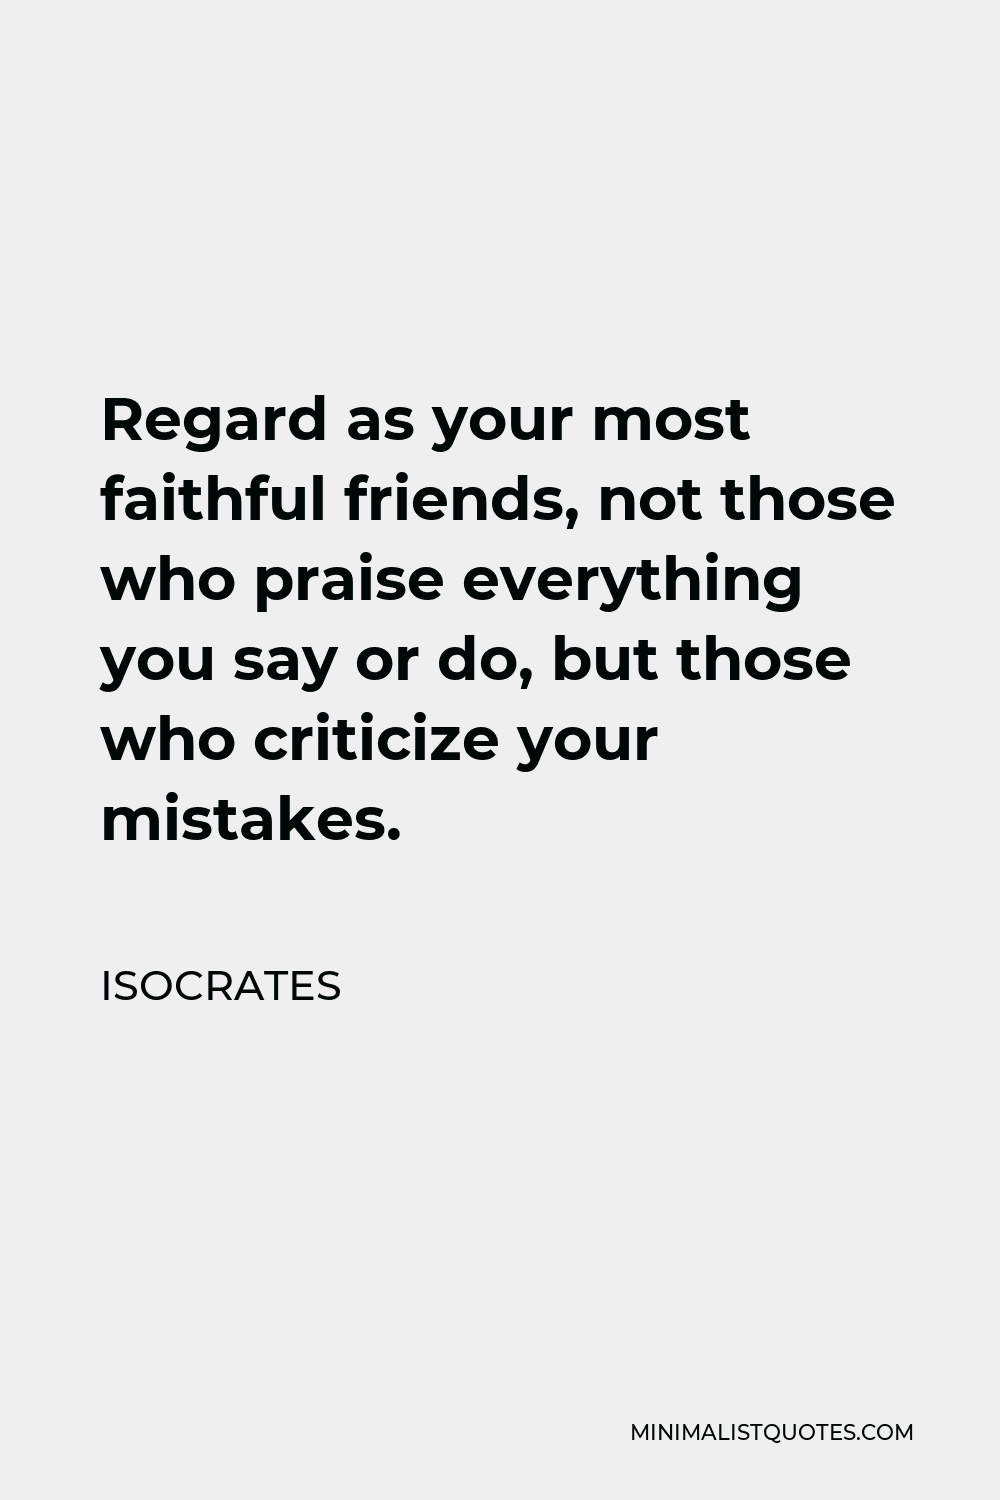 Isocrates Quote - Regard as your most faithful friends, not those who praise everything you say or do, but those who criticize your mistakes.